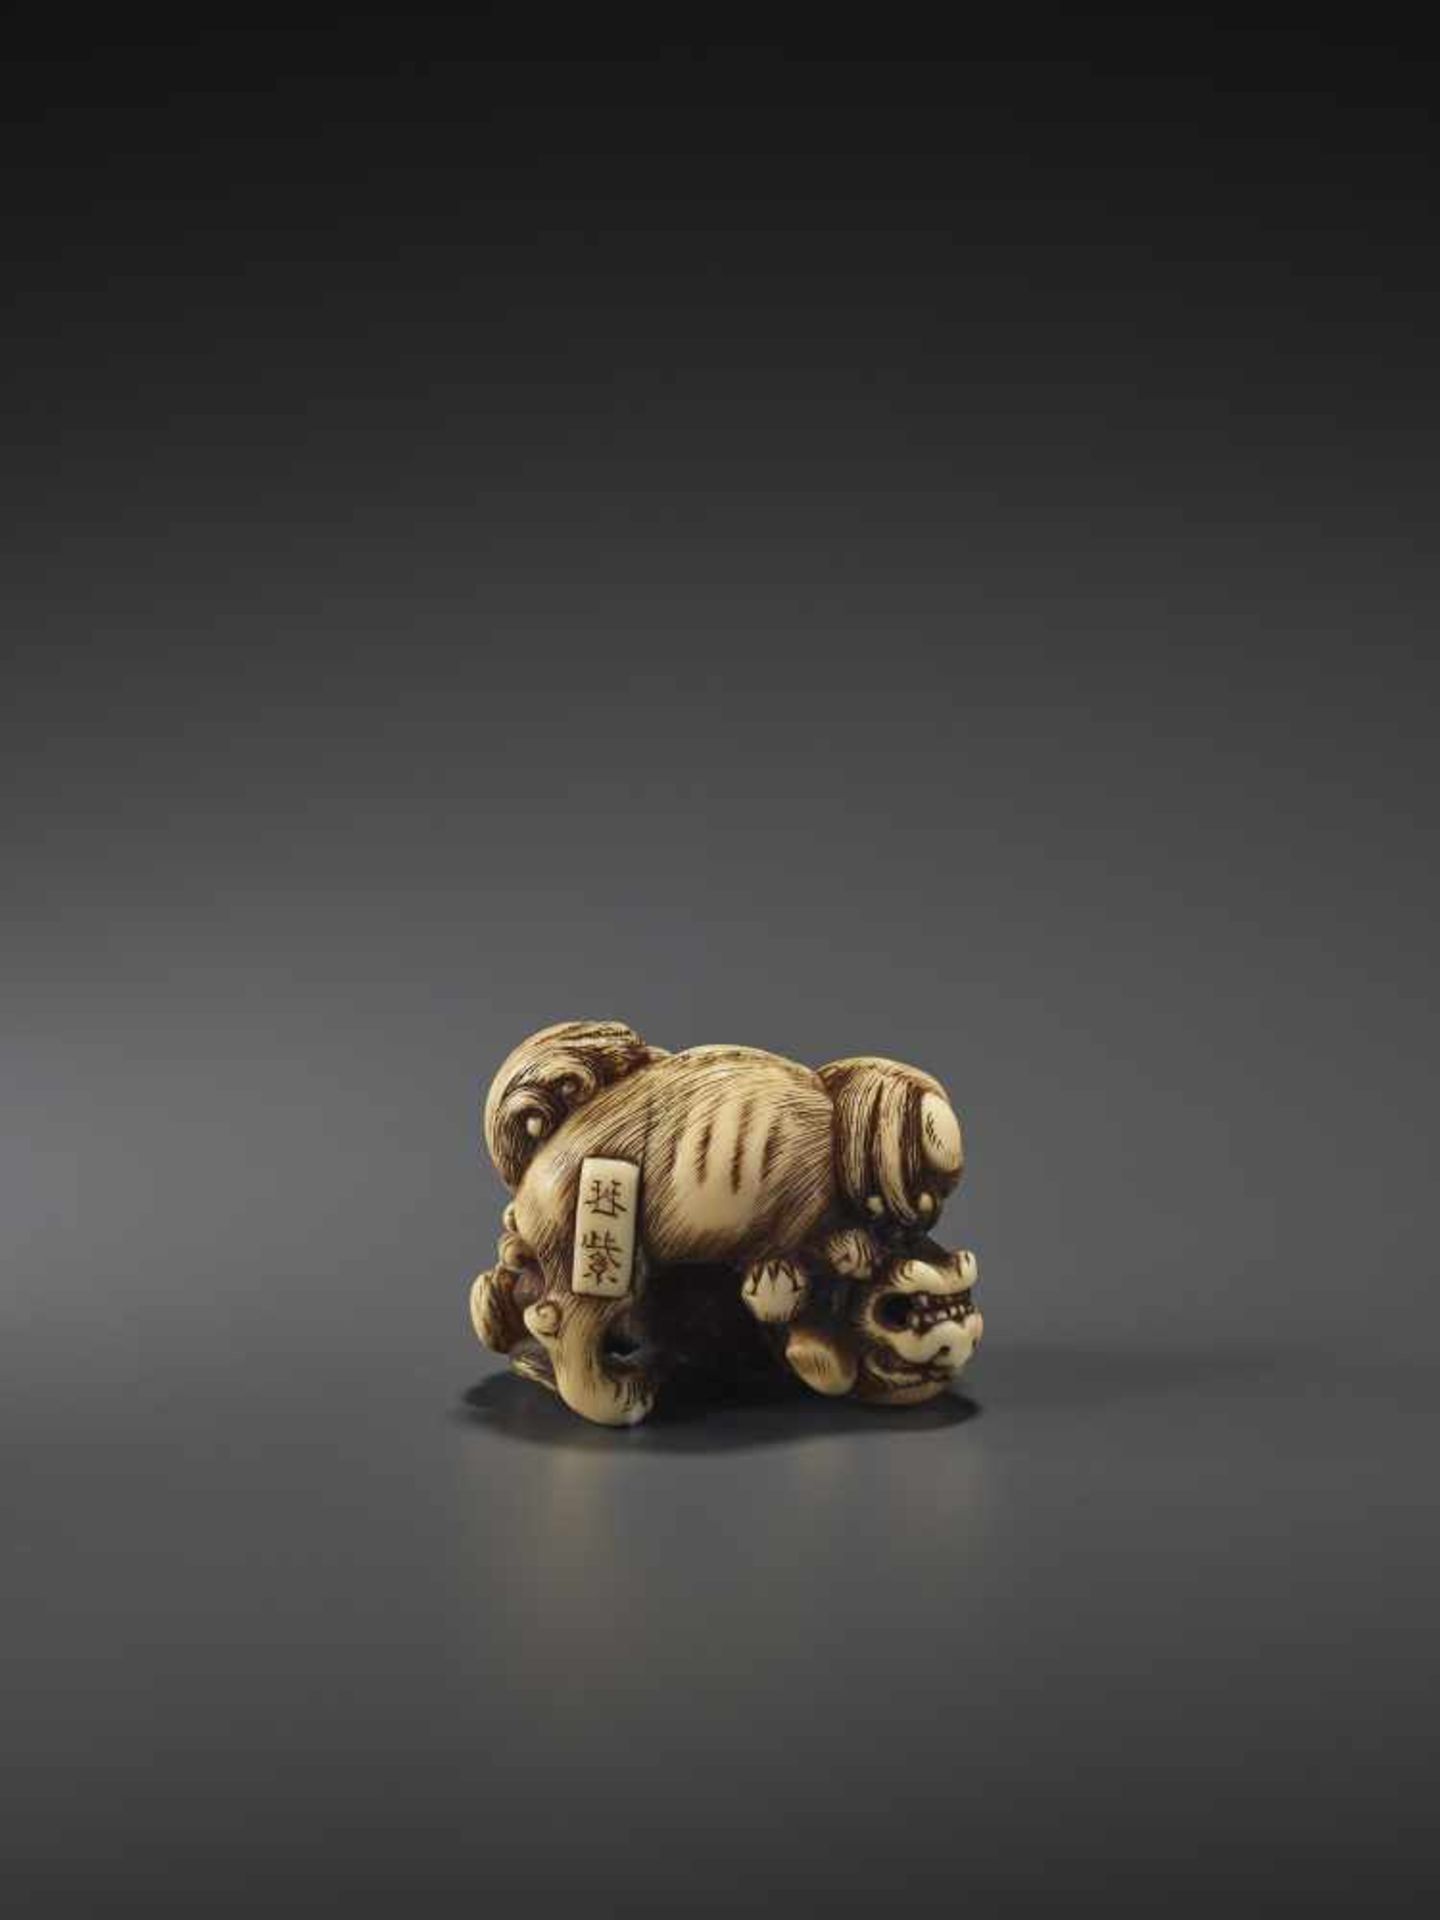 A FINE IVORY NETSUKE OF TWO FIGHTING SHISHI BY KINSHI By Kinshi, ivory netsukeJapan, 19th century, - Image 6 of 10